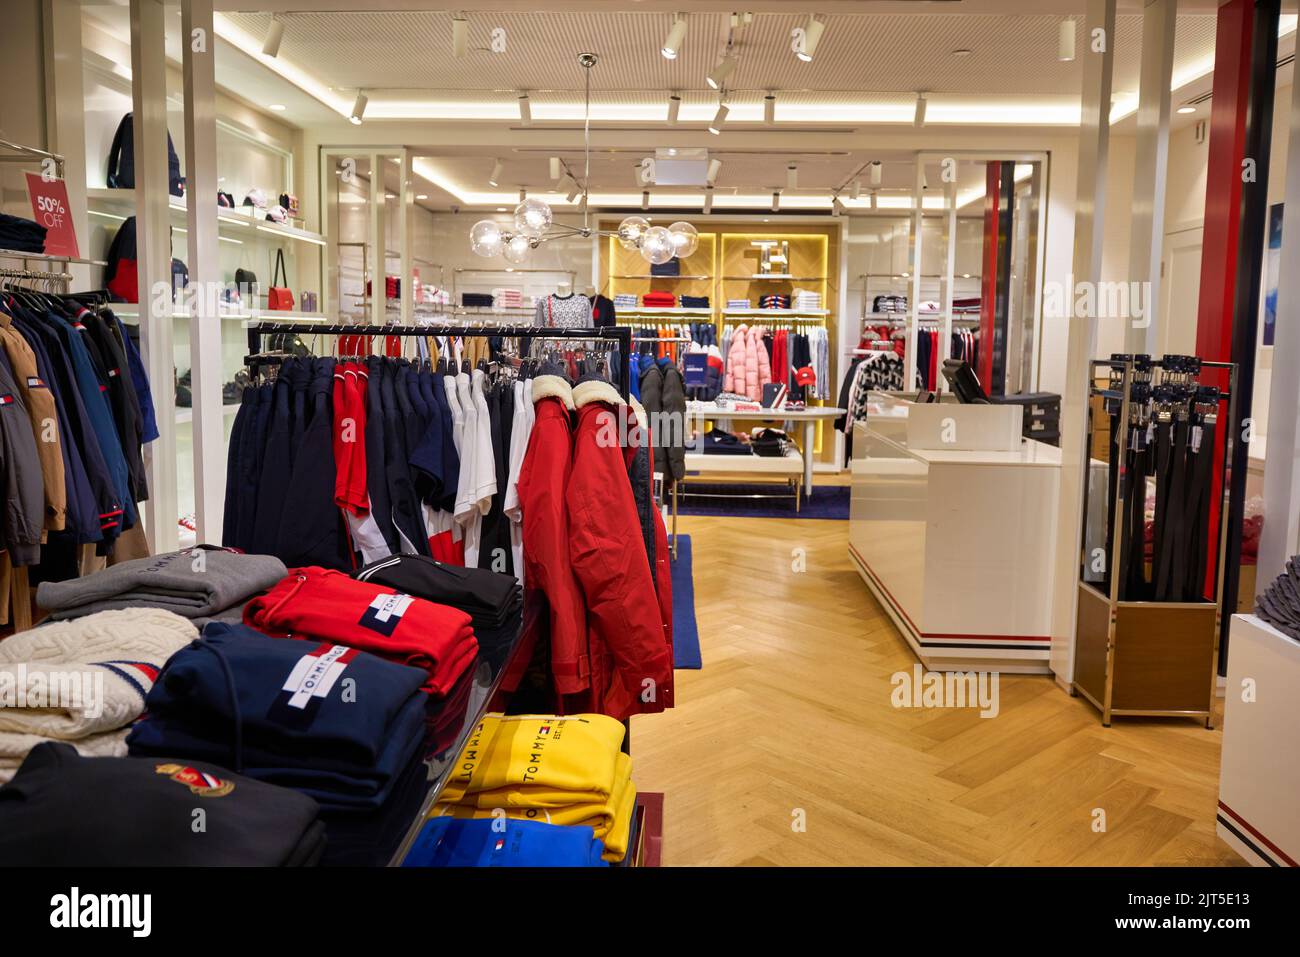 Tommy hilfiger clothes shop hi-res stock photography and images - Alamy